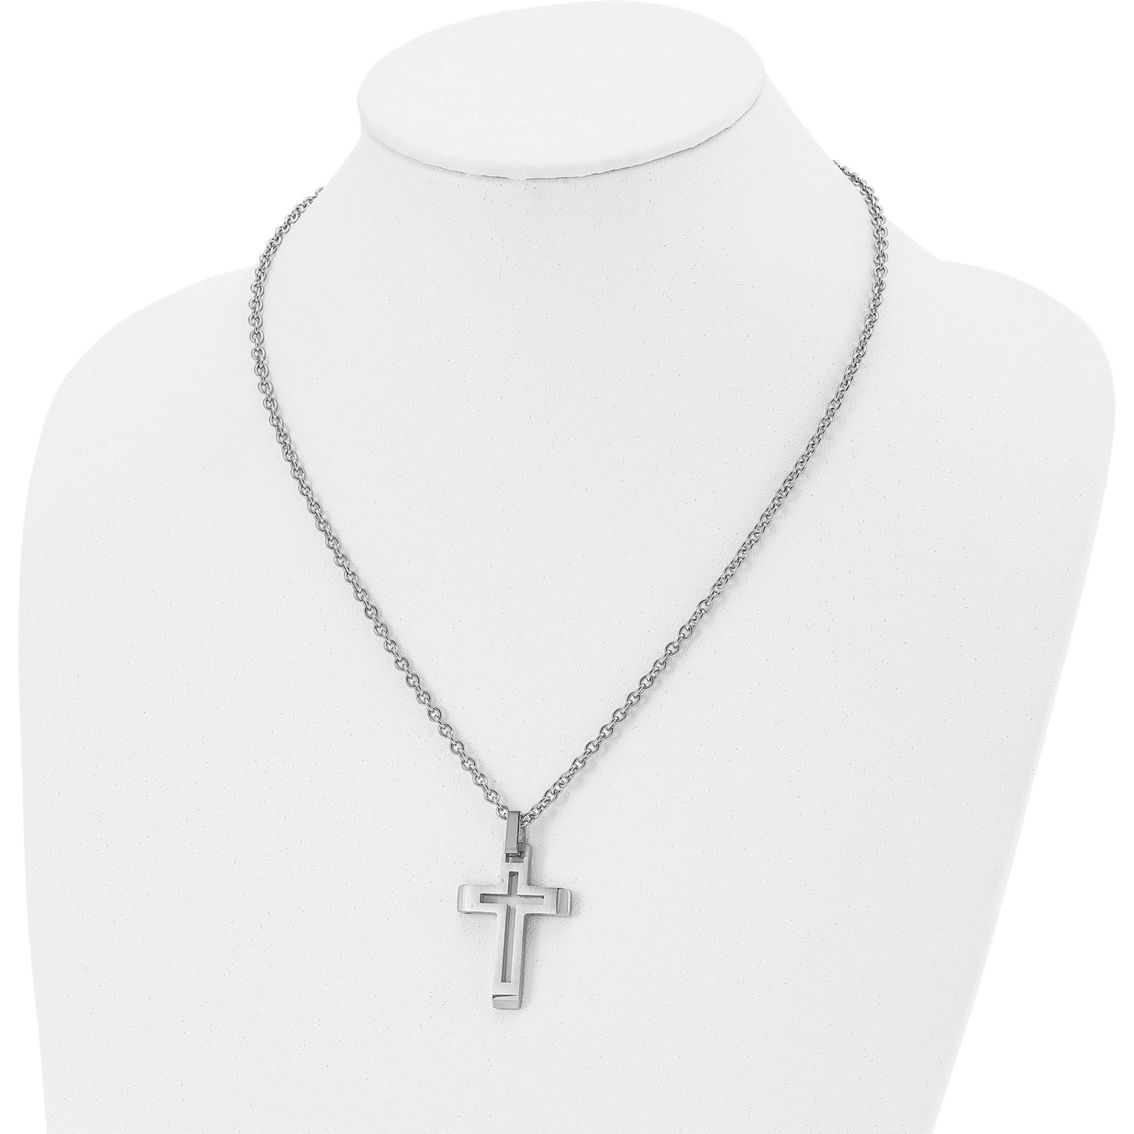 Chisel Stainless Steel Brushed and Polished Cut Out Cross Pendant - Image 3 of 4